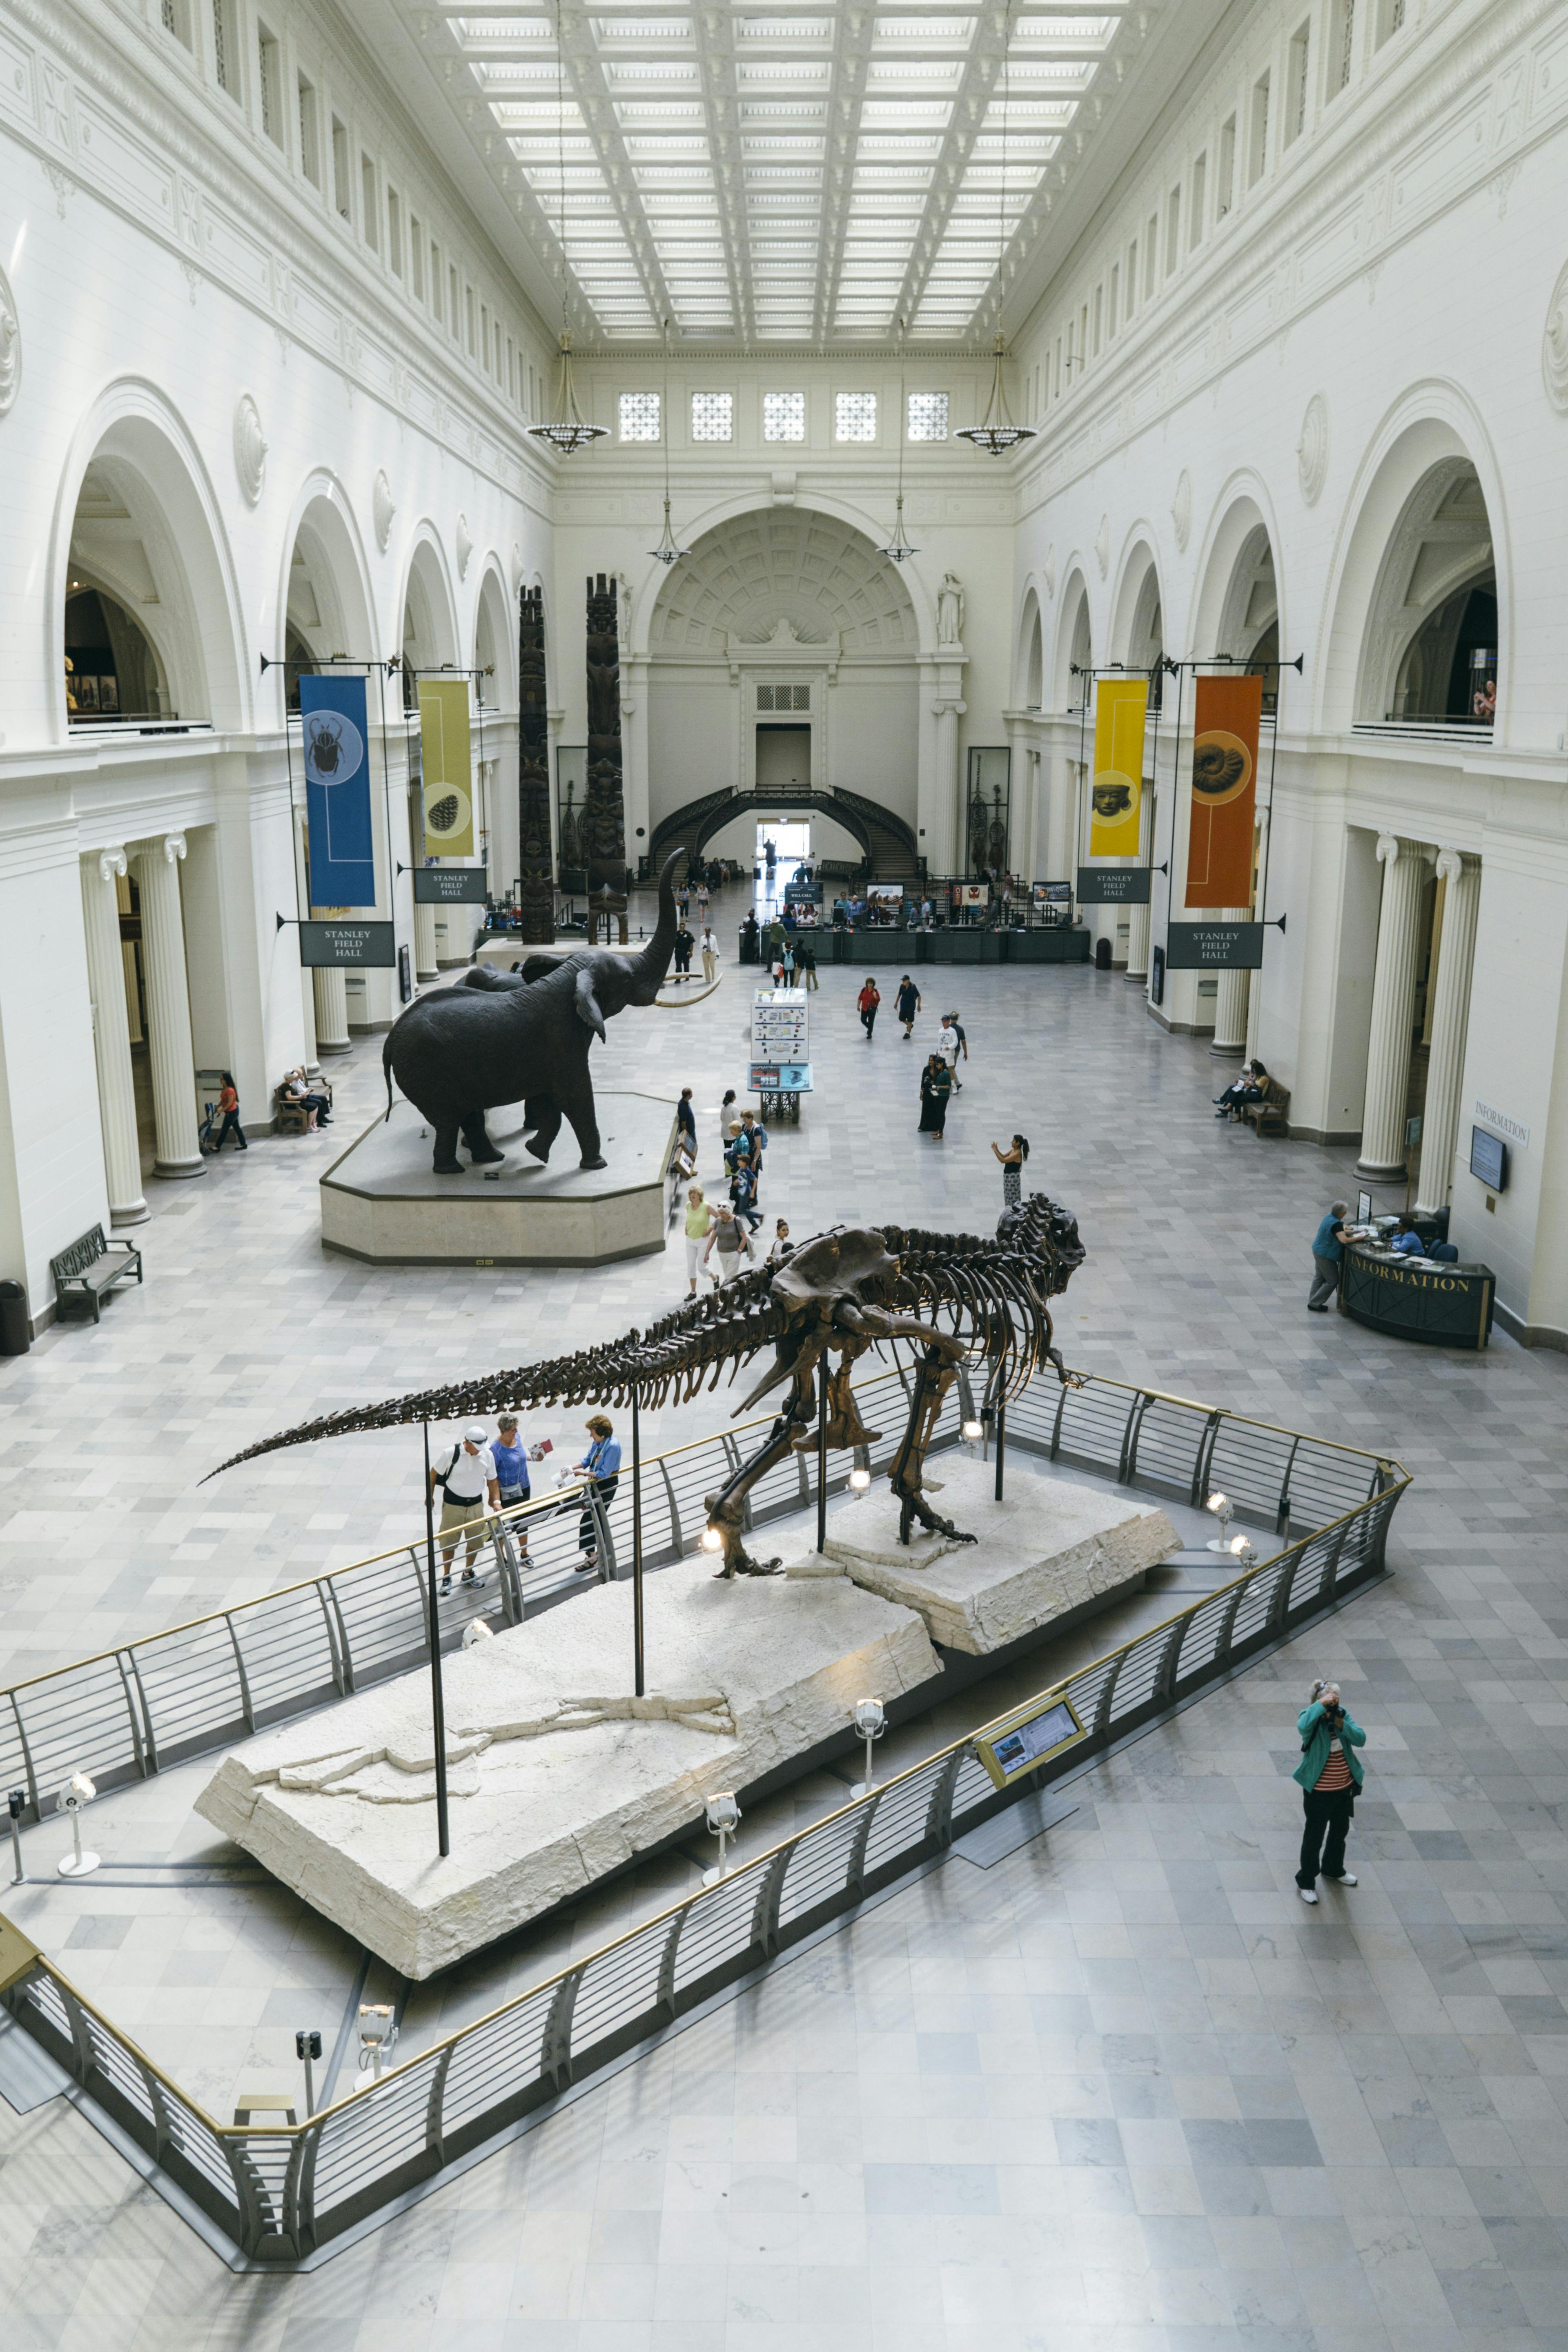 The interior of Chicago’s Natural History Museum, looking down on tourists in the atrium. A group of people stand around a Tyrannosaurus Rex skeleton, looking at a map.